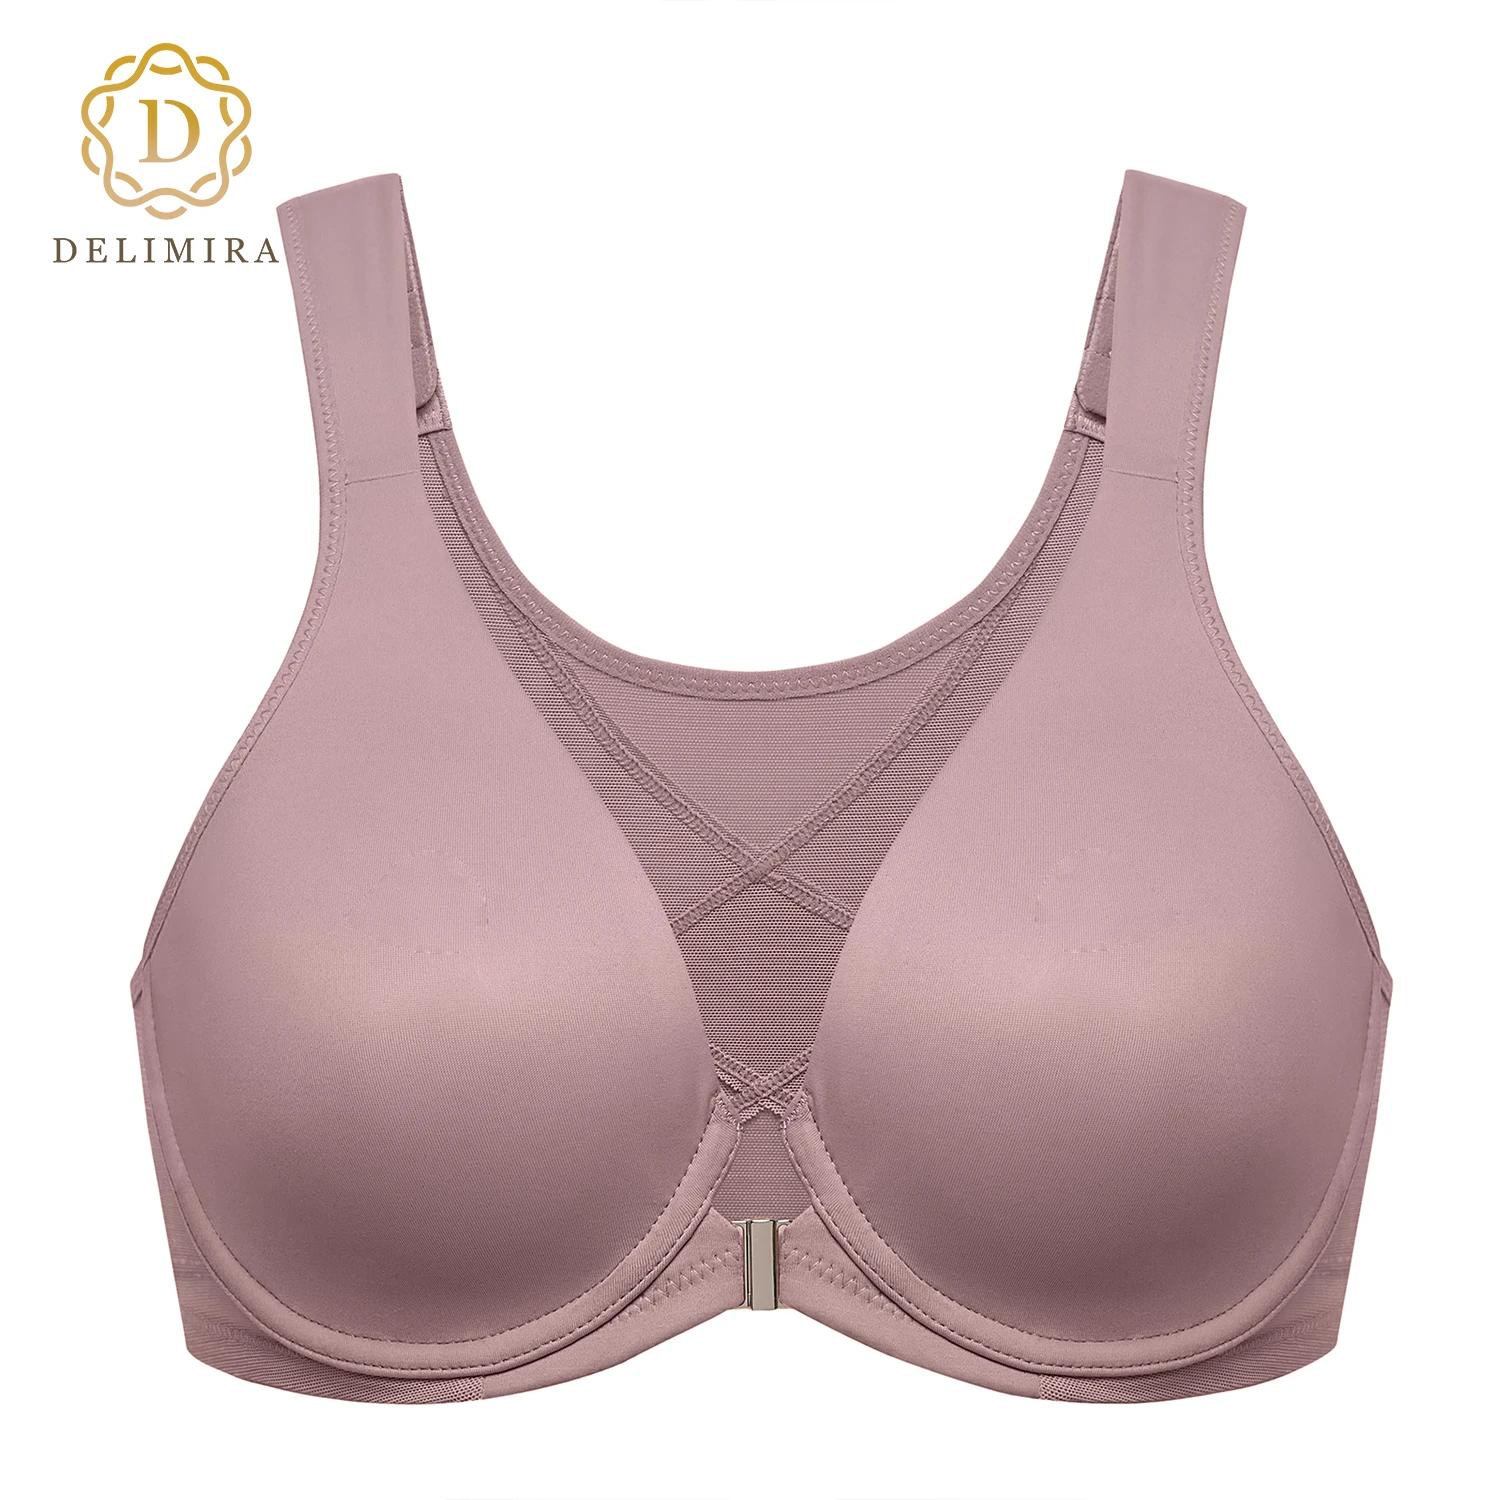 

DELIMIRA Women's Front Closure Bras Posture Full Coverage Plus Size Underwire Unlined Back Support Plunge Seamless Bra B-H